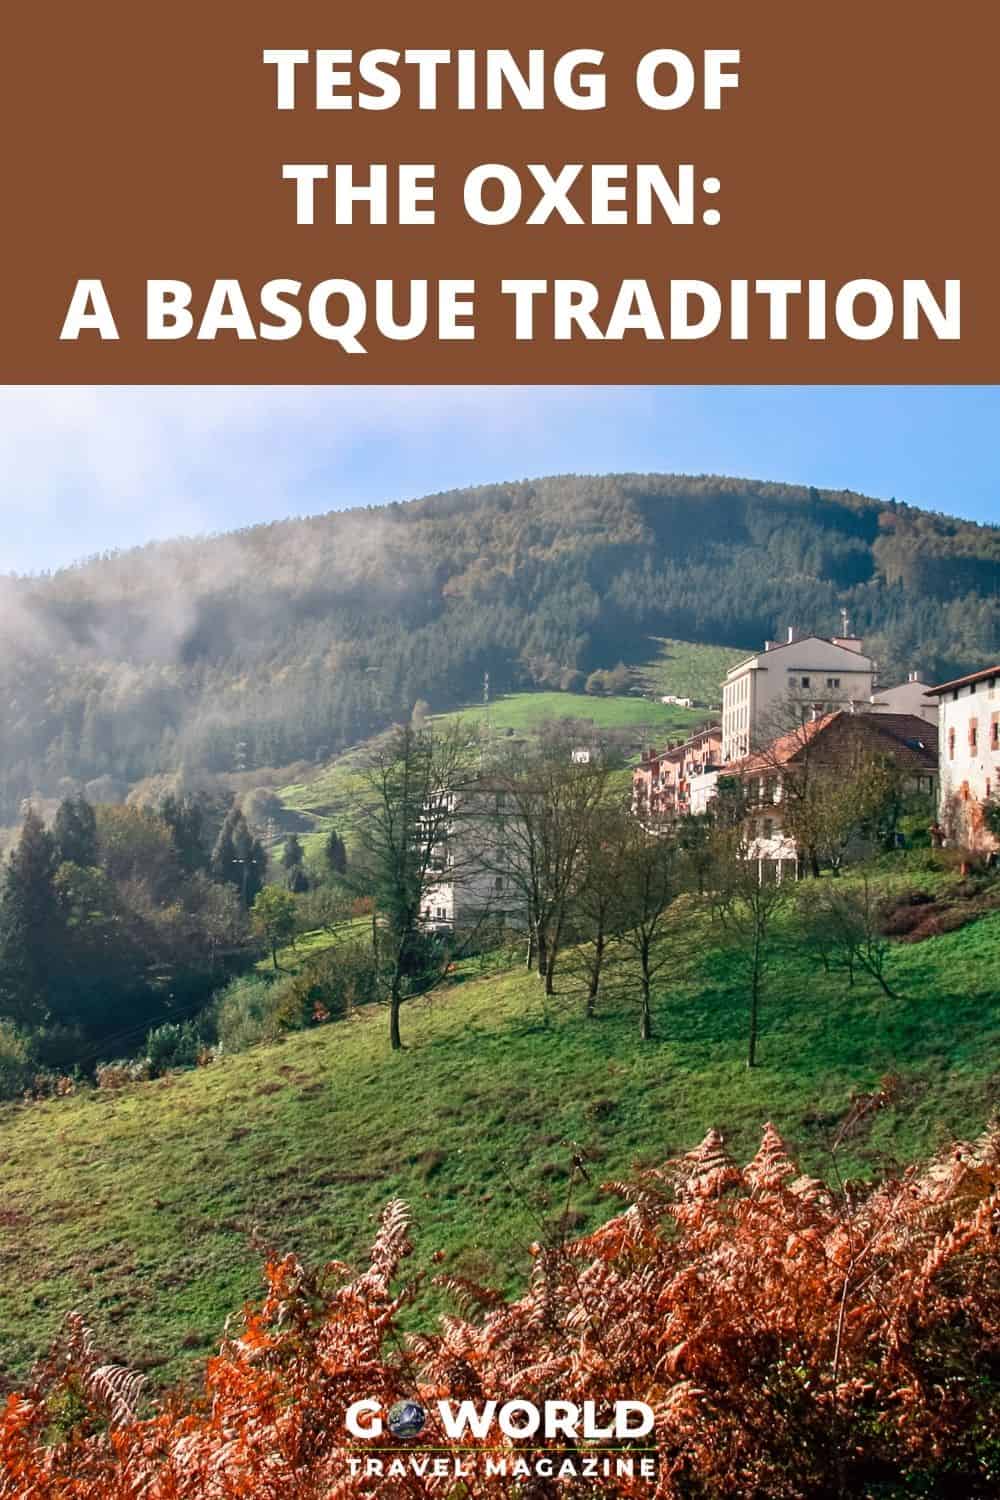 The Basque tradition Testing of the Oxen is not as famous as the Running With the Bulls which makes it a more authentic experience in Spain. #runningofthebulls #basquecountry #spain